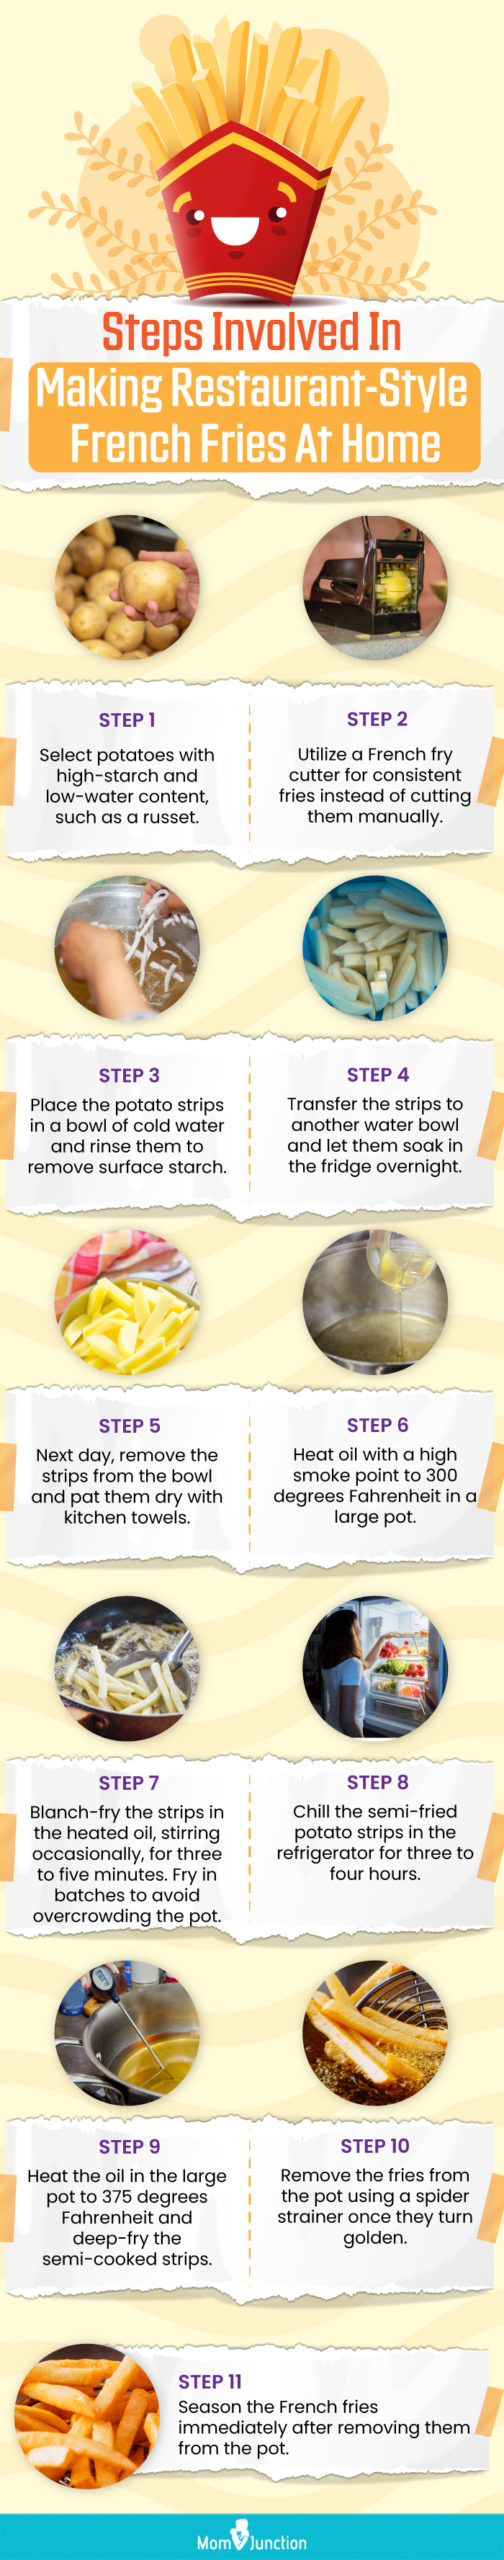 Steps Involved In Making Restaurant Style French Fries At Home (infographic)